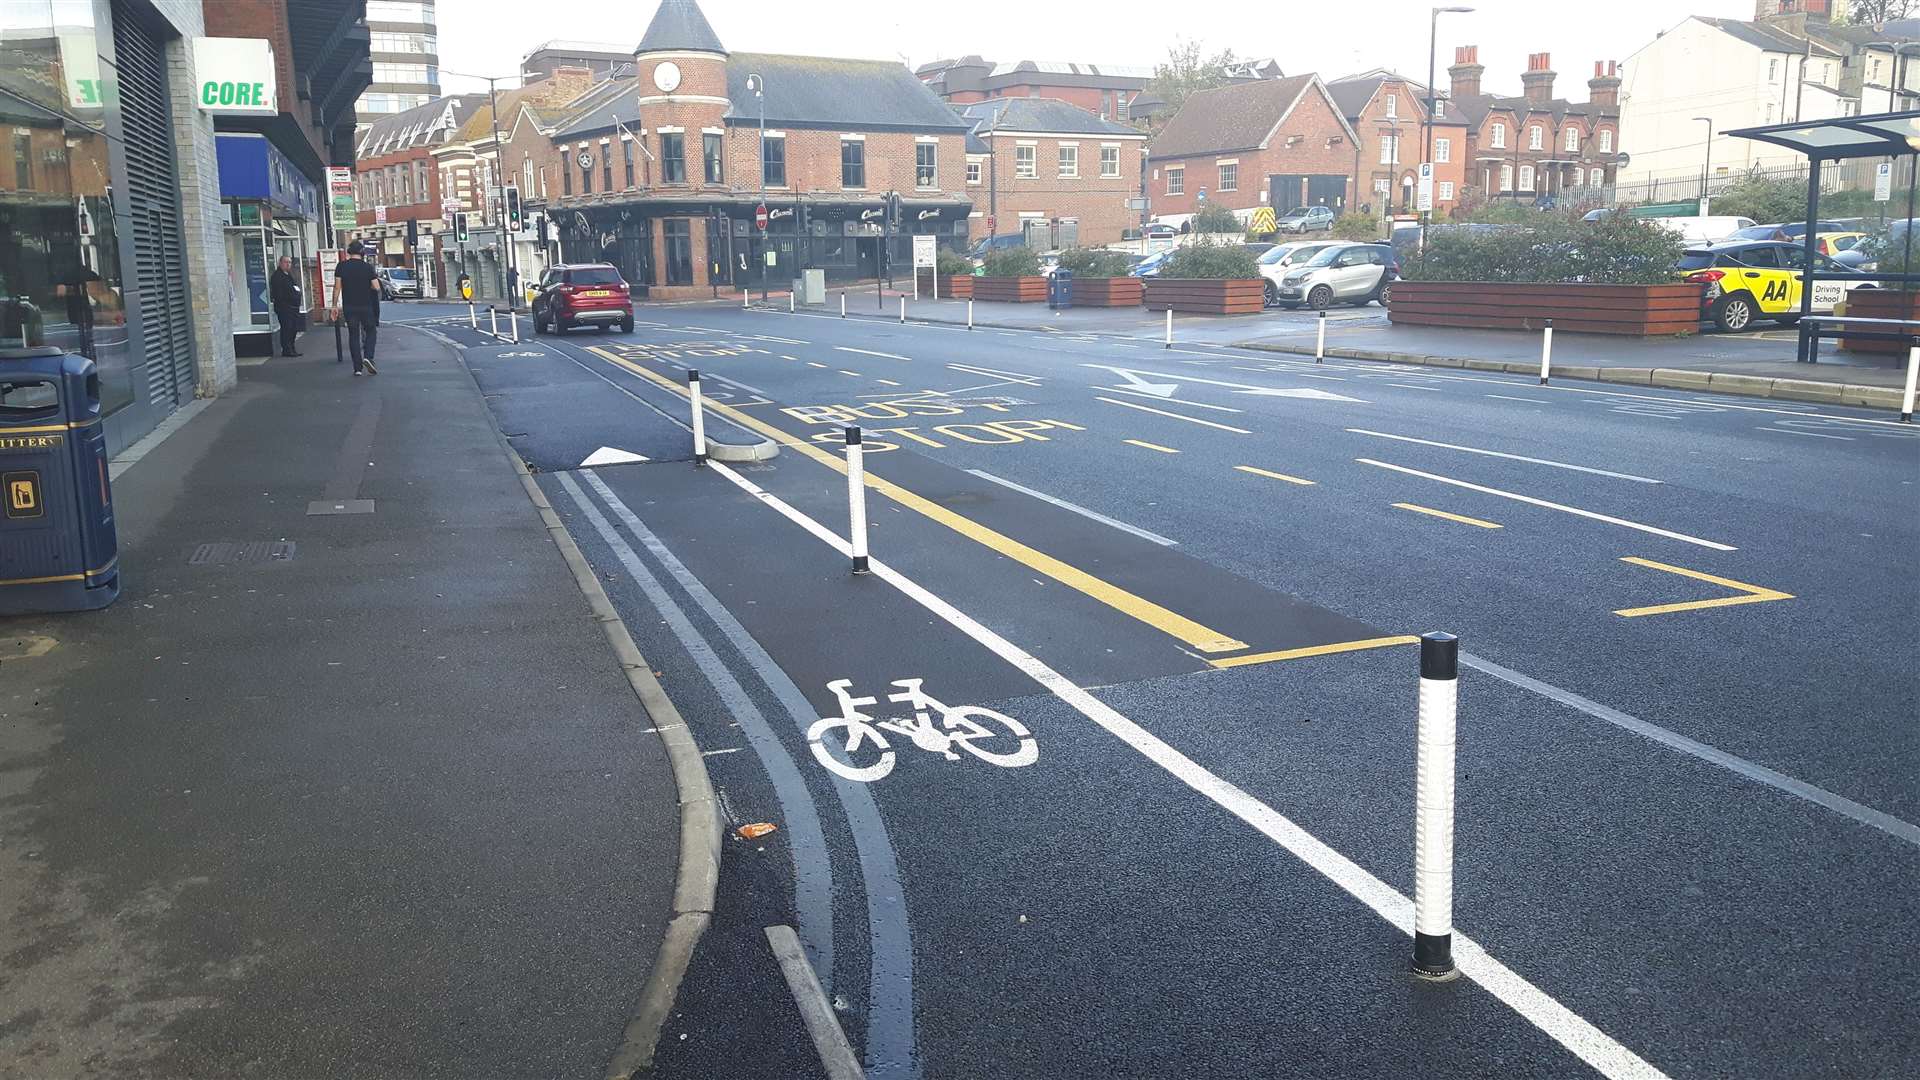 A pop up cycle lane in King Street Maidstone which appeared as part of an earlier KCC scheme